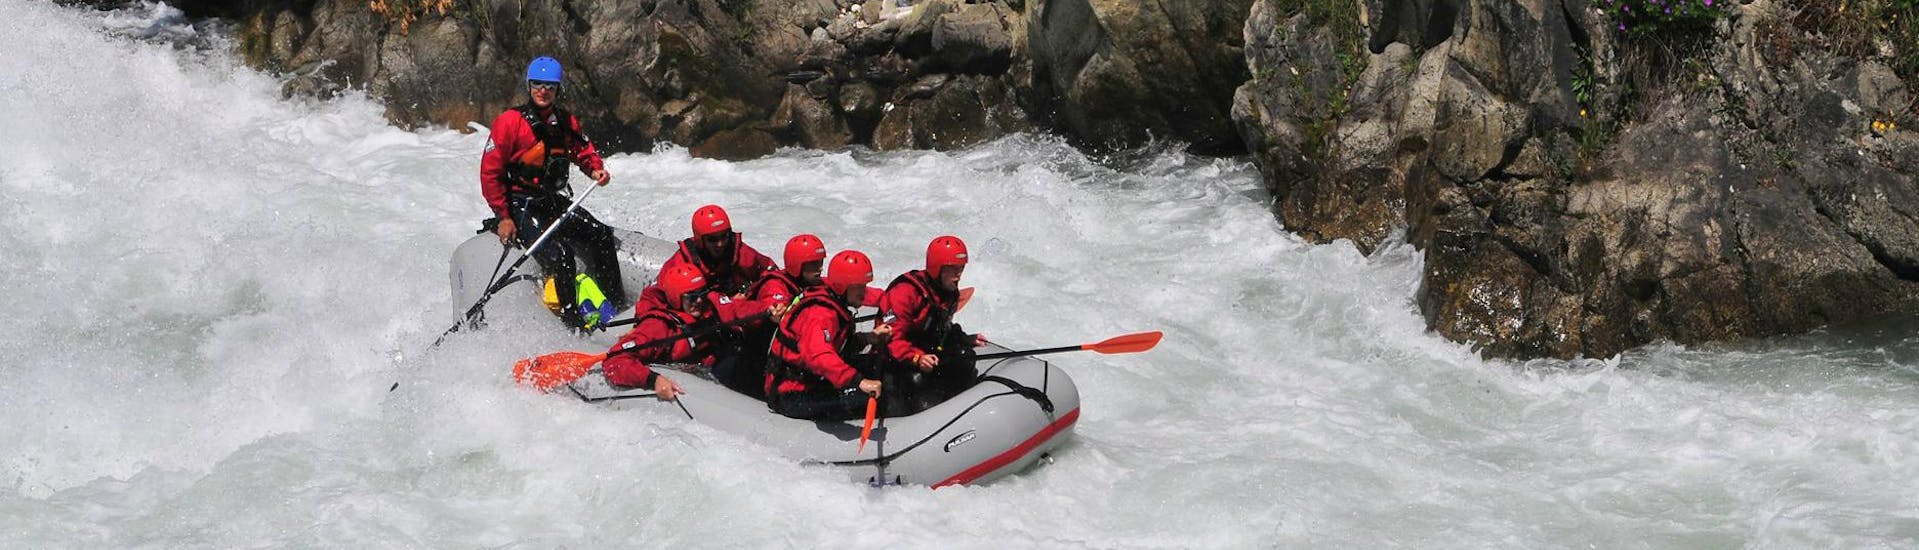 Rafting sull'Isarco - Aphrodite.